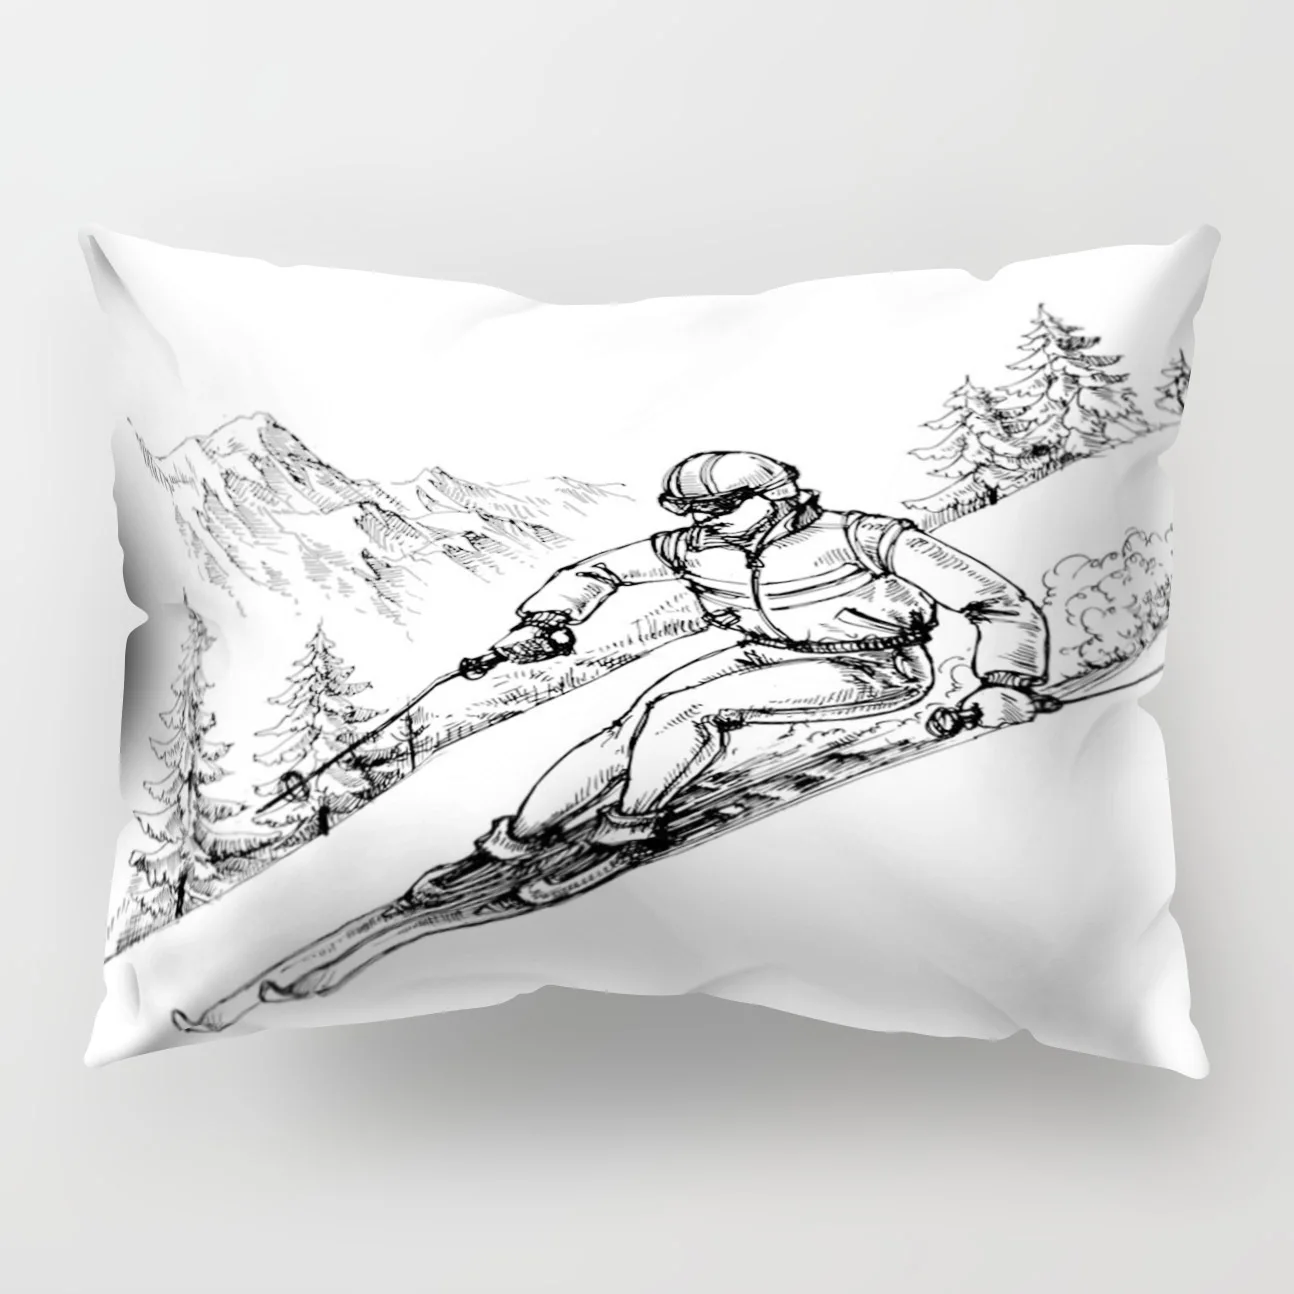 

New Chinese Art Sketch Landscape Landscape Fluffy Pillow Case Sofa Home Polyester Rectangular Cushion Cover Suite Decoration